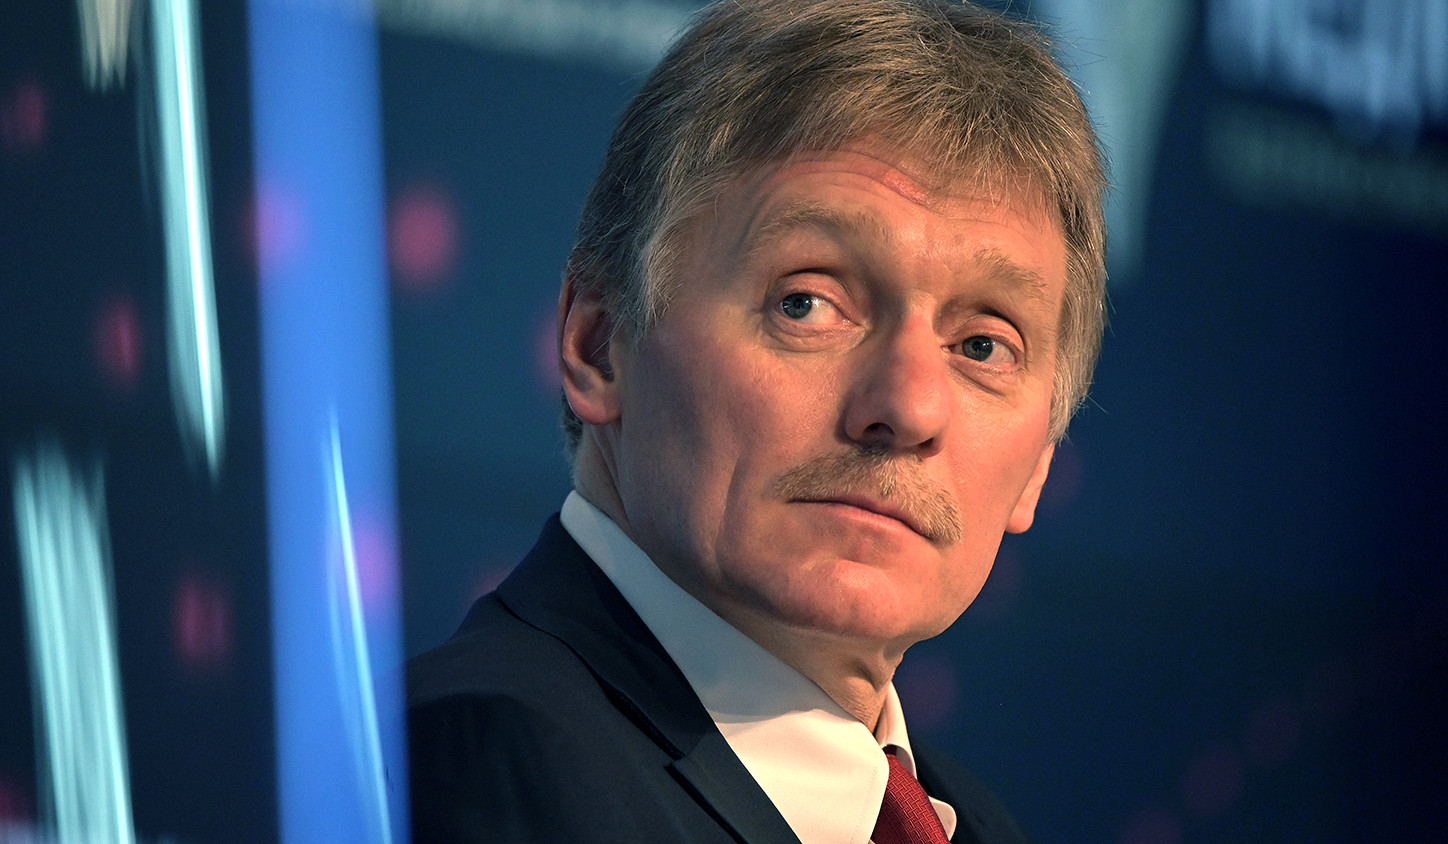 There are nationalists in Turkey who promote idea of ‘Great Turan’: Peskov